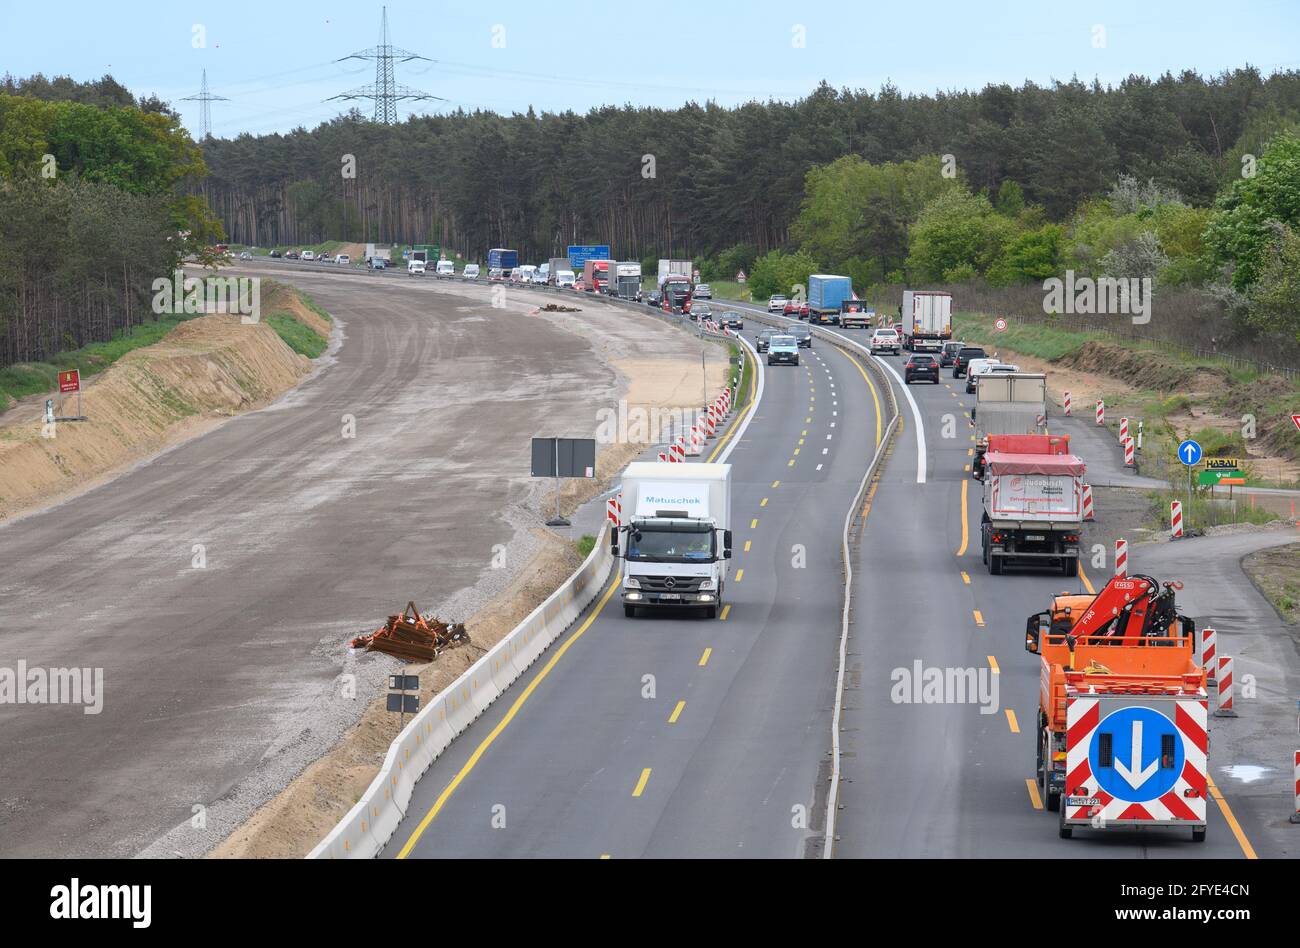 Velten, Germany. 27th May, 2021. Cars and trucks drive on the narrowed four-lane carriageway of the A10 motorway (Berliner Ring) shortly after the Oranienburg junction next to the carriageway under construction. The A10 and the A24 between the Pankow interchange and the Neuruppin junction are among the busiest routes in the capital region. They will be upgraded and renewed until 2022 while traffic continues to flow. Credit: Soeren Stache/dpa-Zentralbild/dpa/Alamy Live News Stock Photo